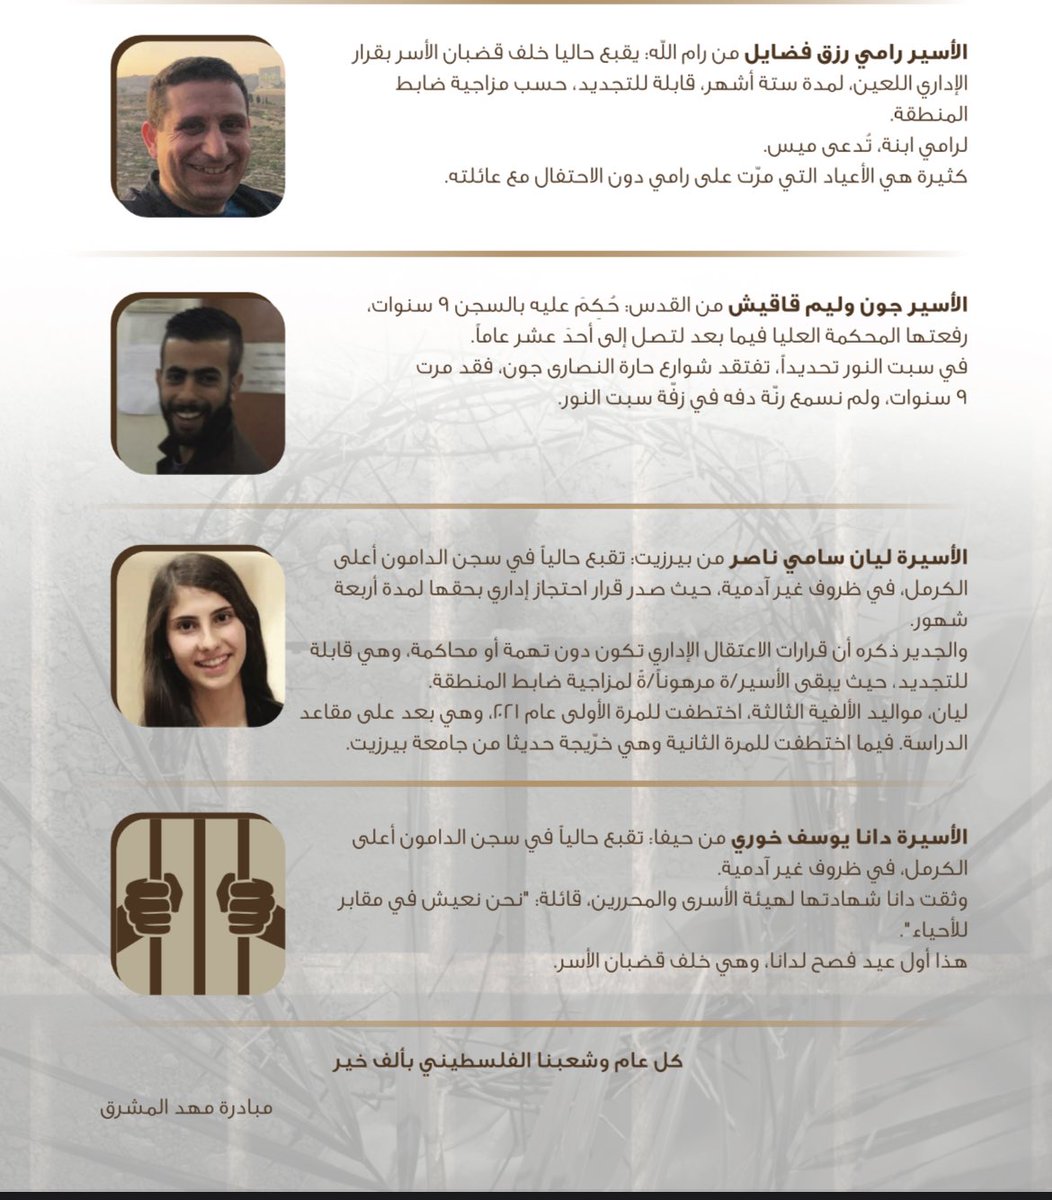 This Easter, these are the names and faces of Palestinian Christians currently languishing in Israeli prisons